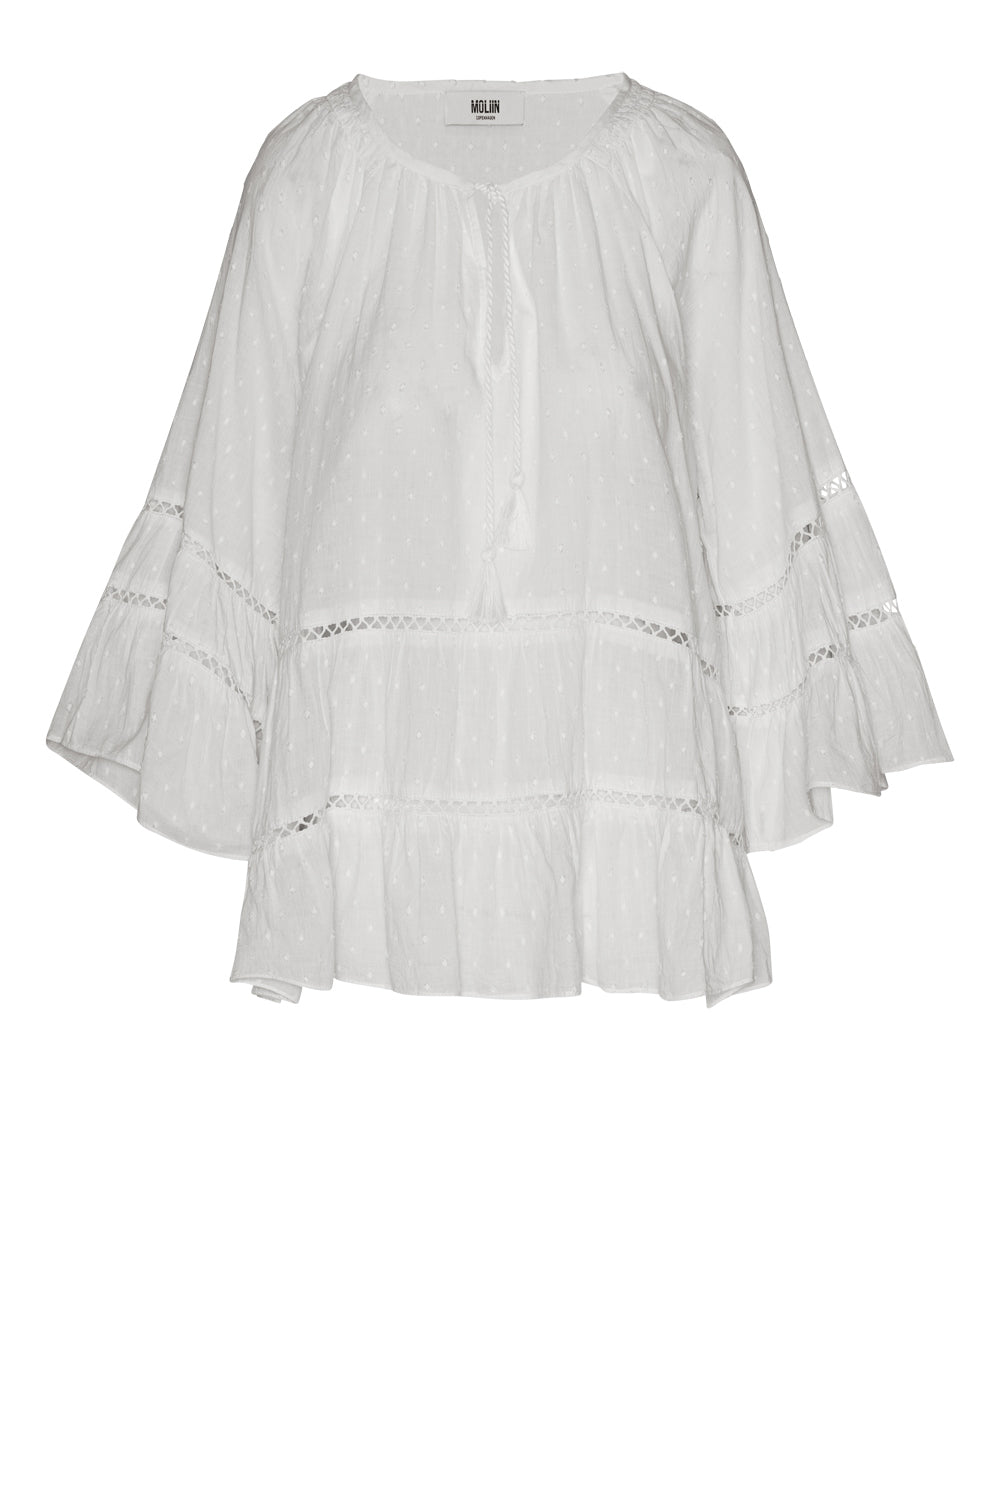 100% cotton white boho style blouse with a dobby spot and lace inserts